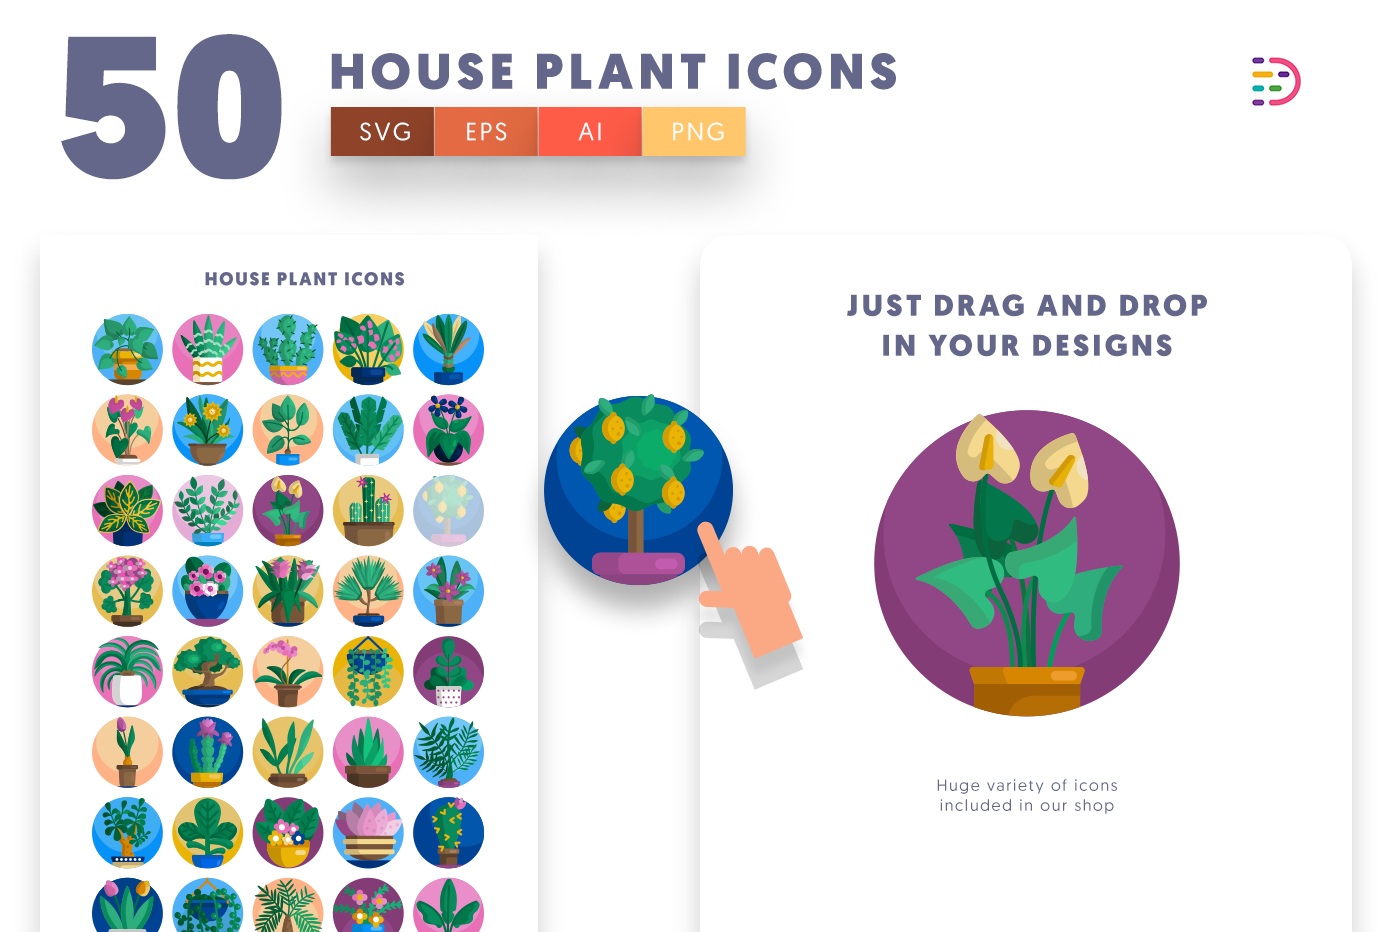 50 House Plant Icons with colored backgrounds